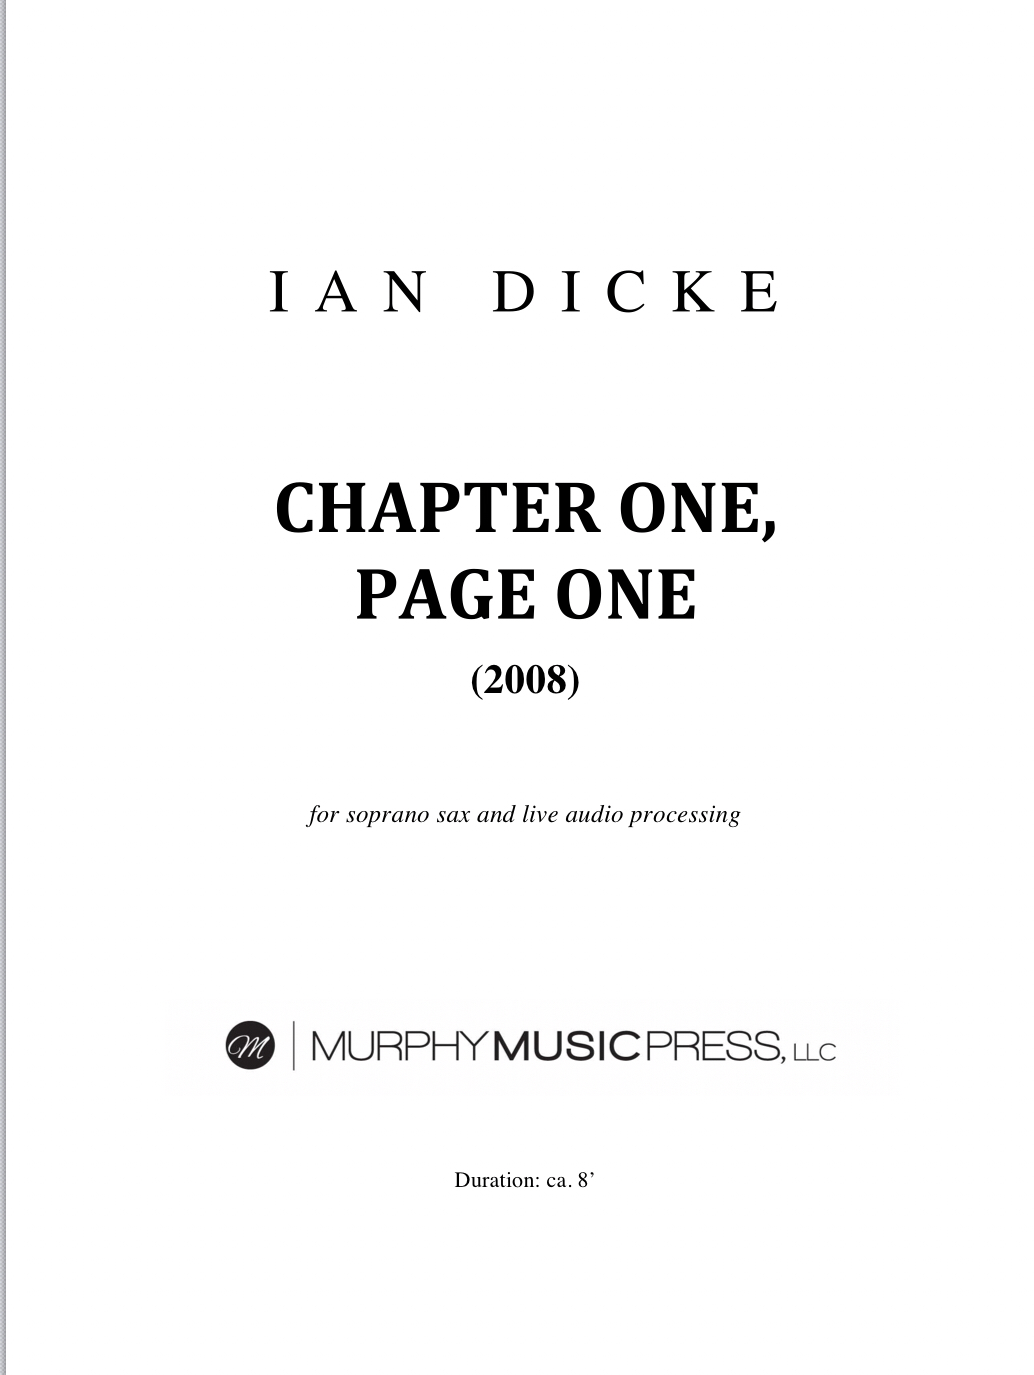 Chapter One, Page One by Ian Dicke